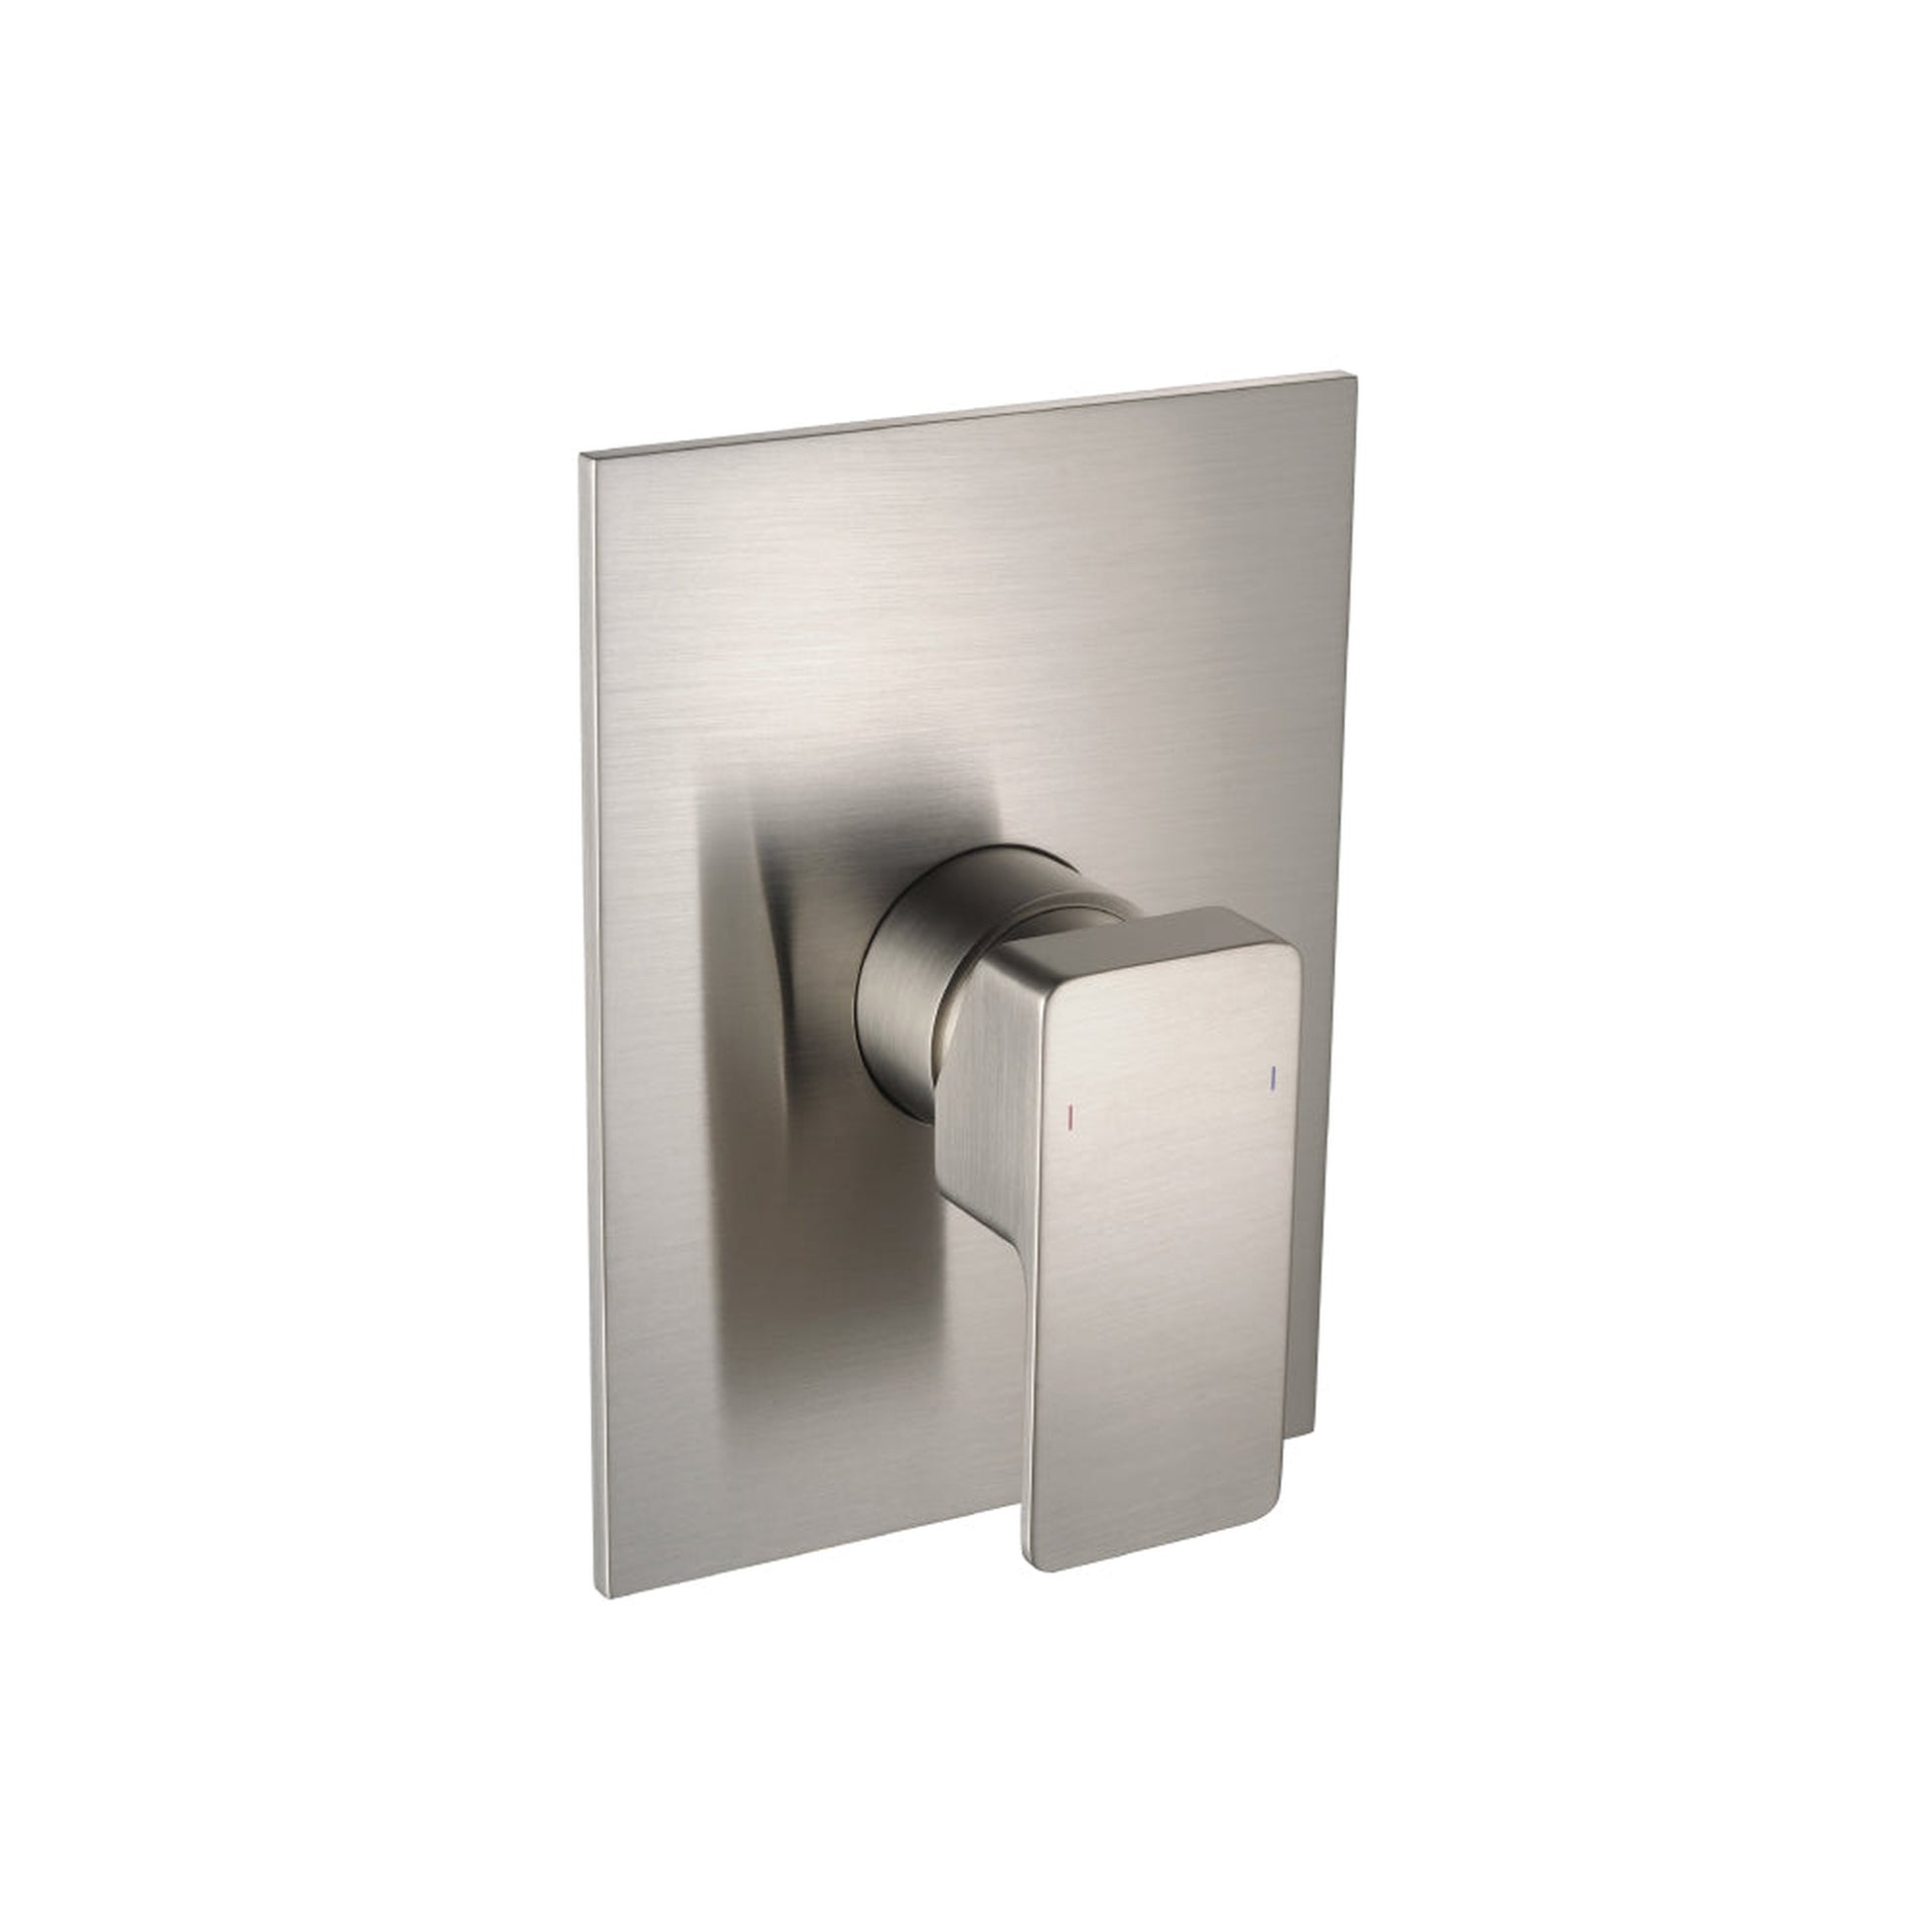 Isenberg Serie 196 Single Output Shower Trim and Handle in Brushed Nickel